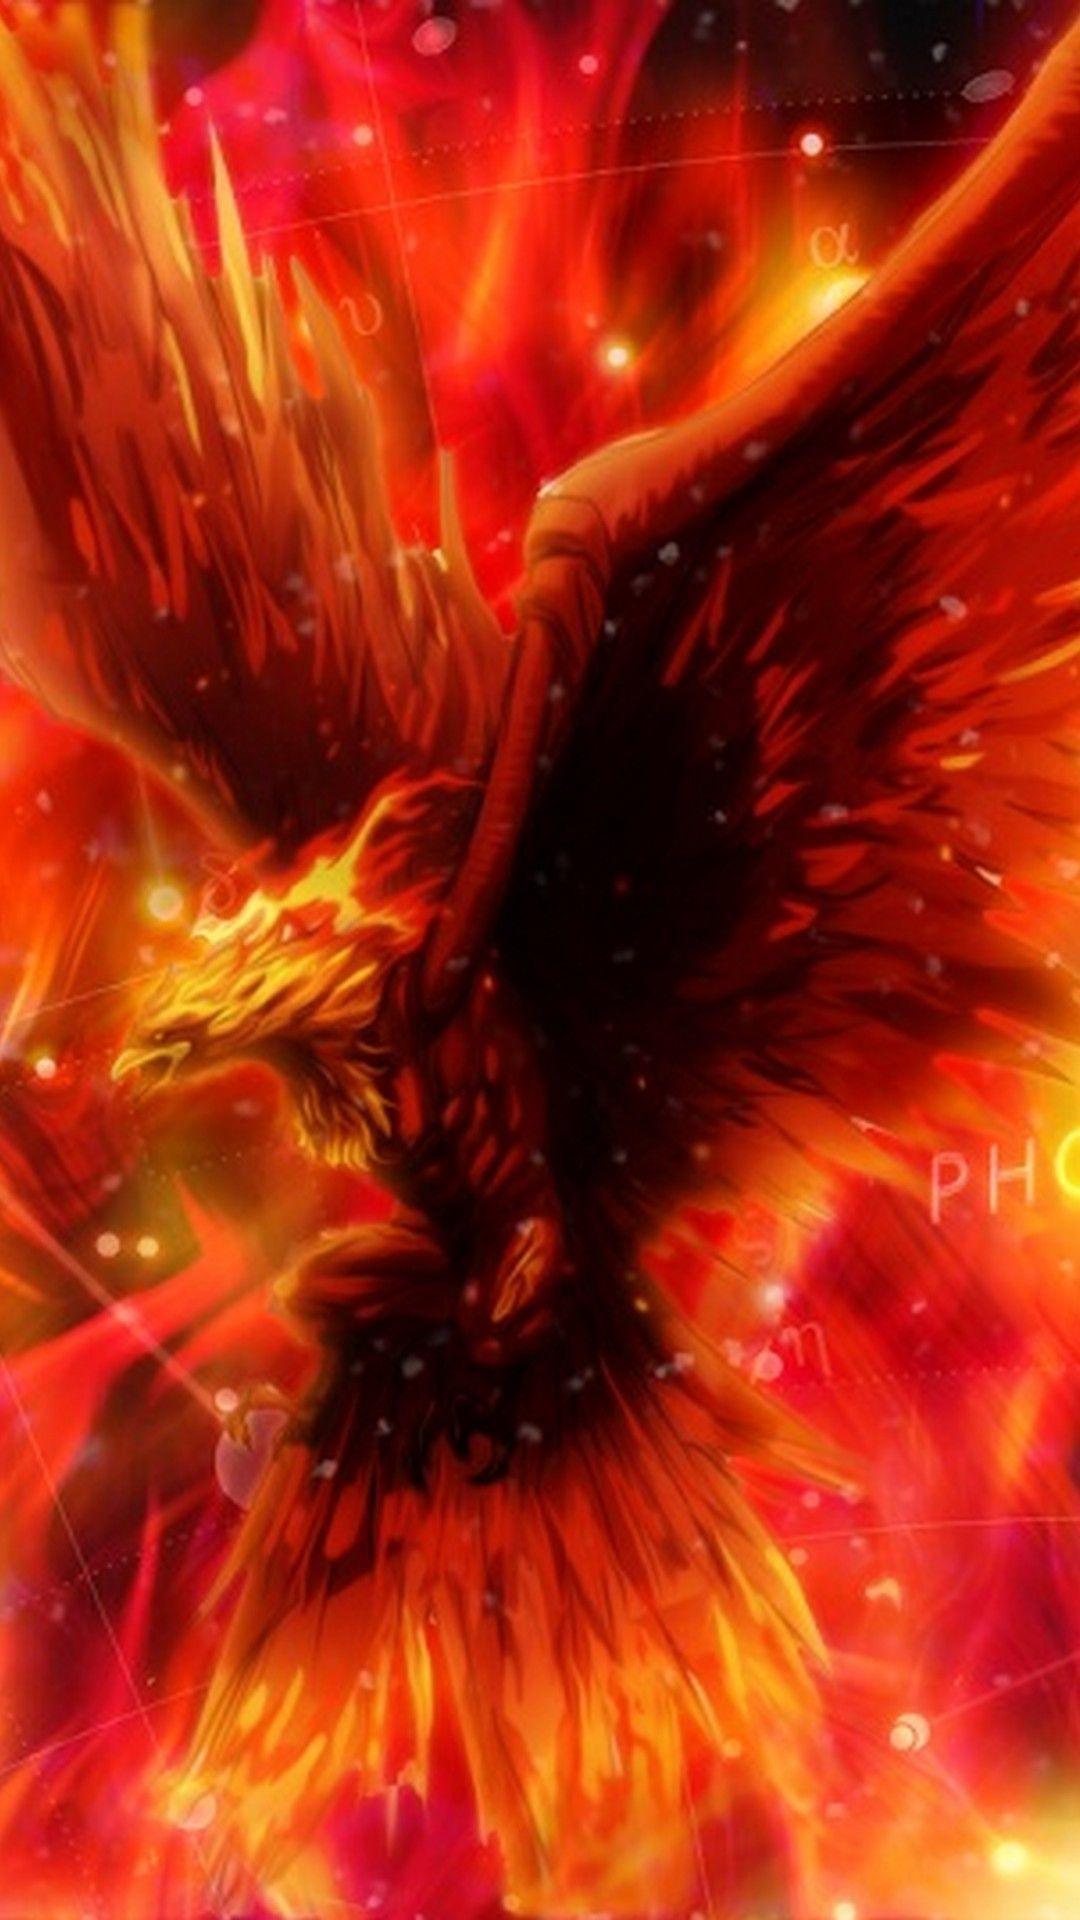 iPhone 8 Wallpaper Phoenix with resolution 1080X1920 pixel You can make  this wallpaper for your iPhone 5 6   Phoenix images Phoenix wallpaper  Phoenix artwork